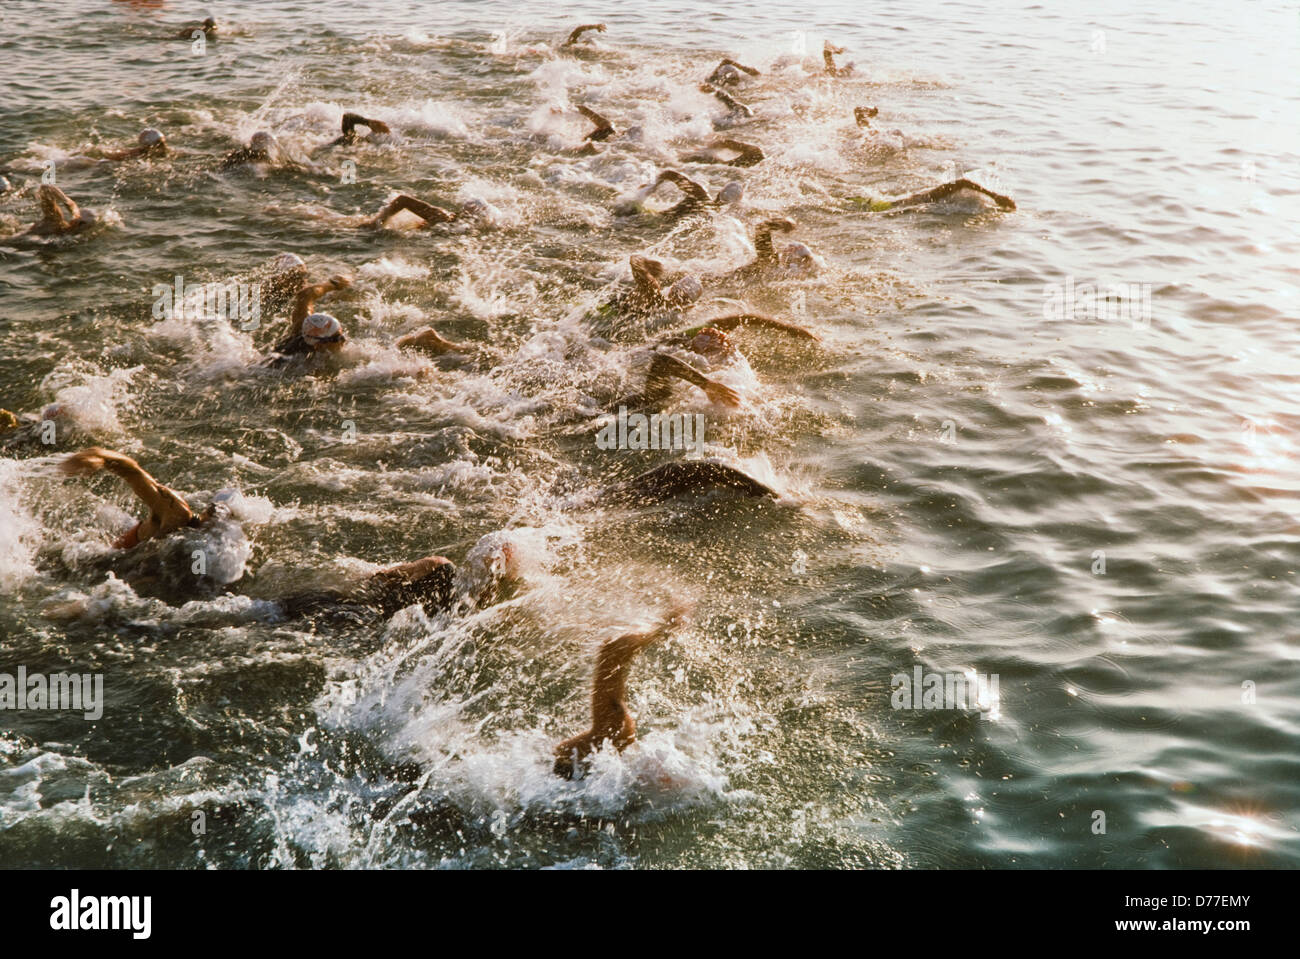 Start of Ironman Triatalon, competitors swimming in ocean, motion effects and splash. Stock Photo